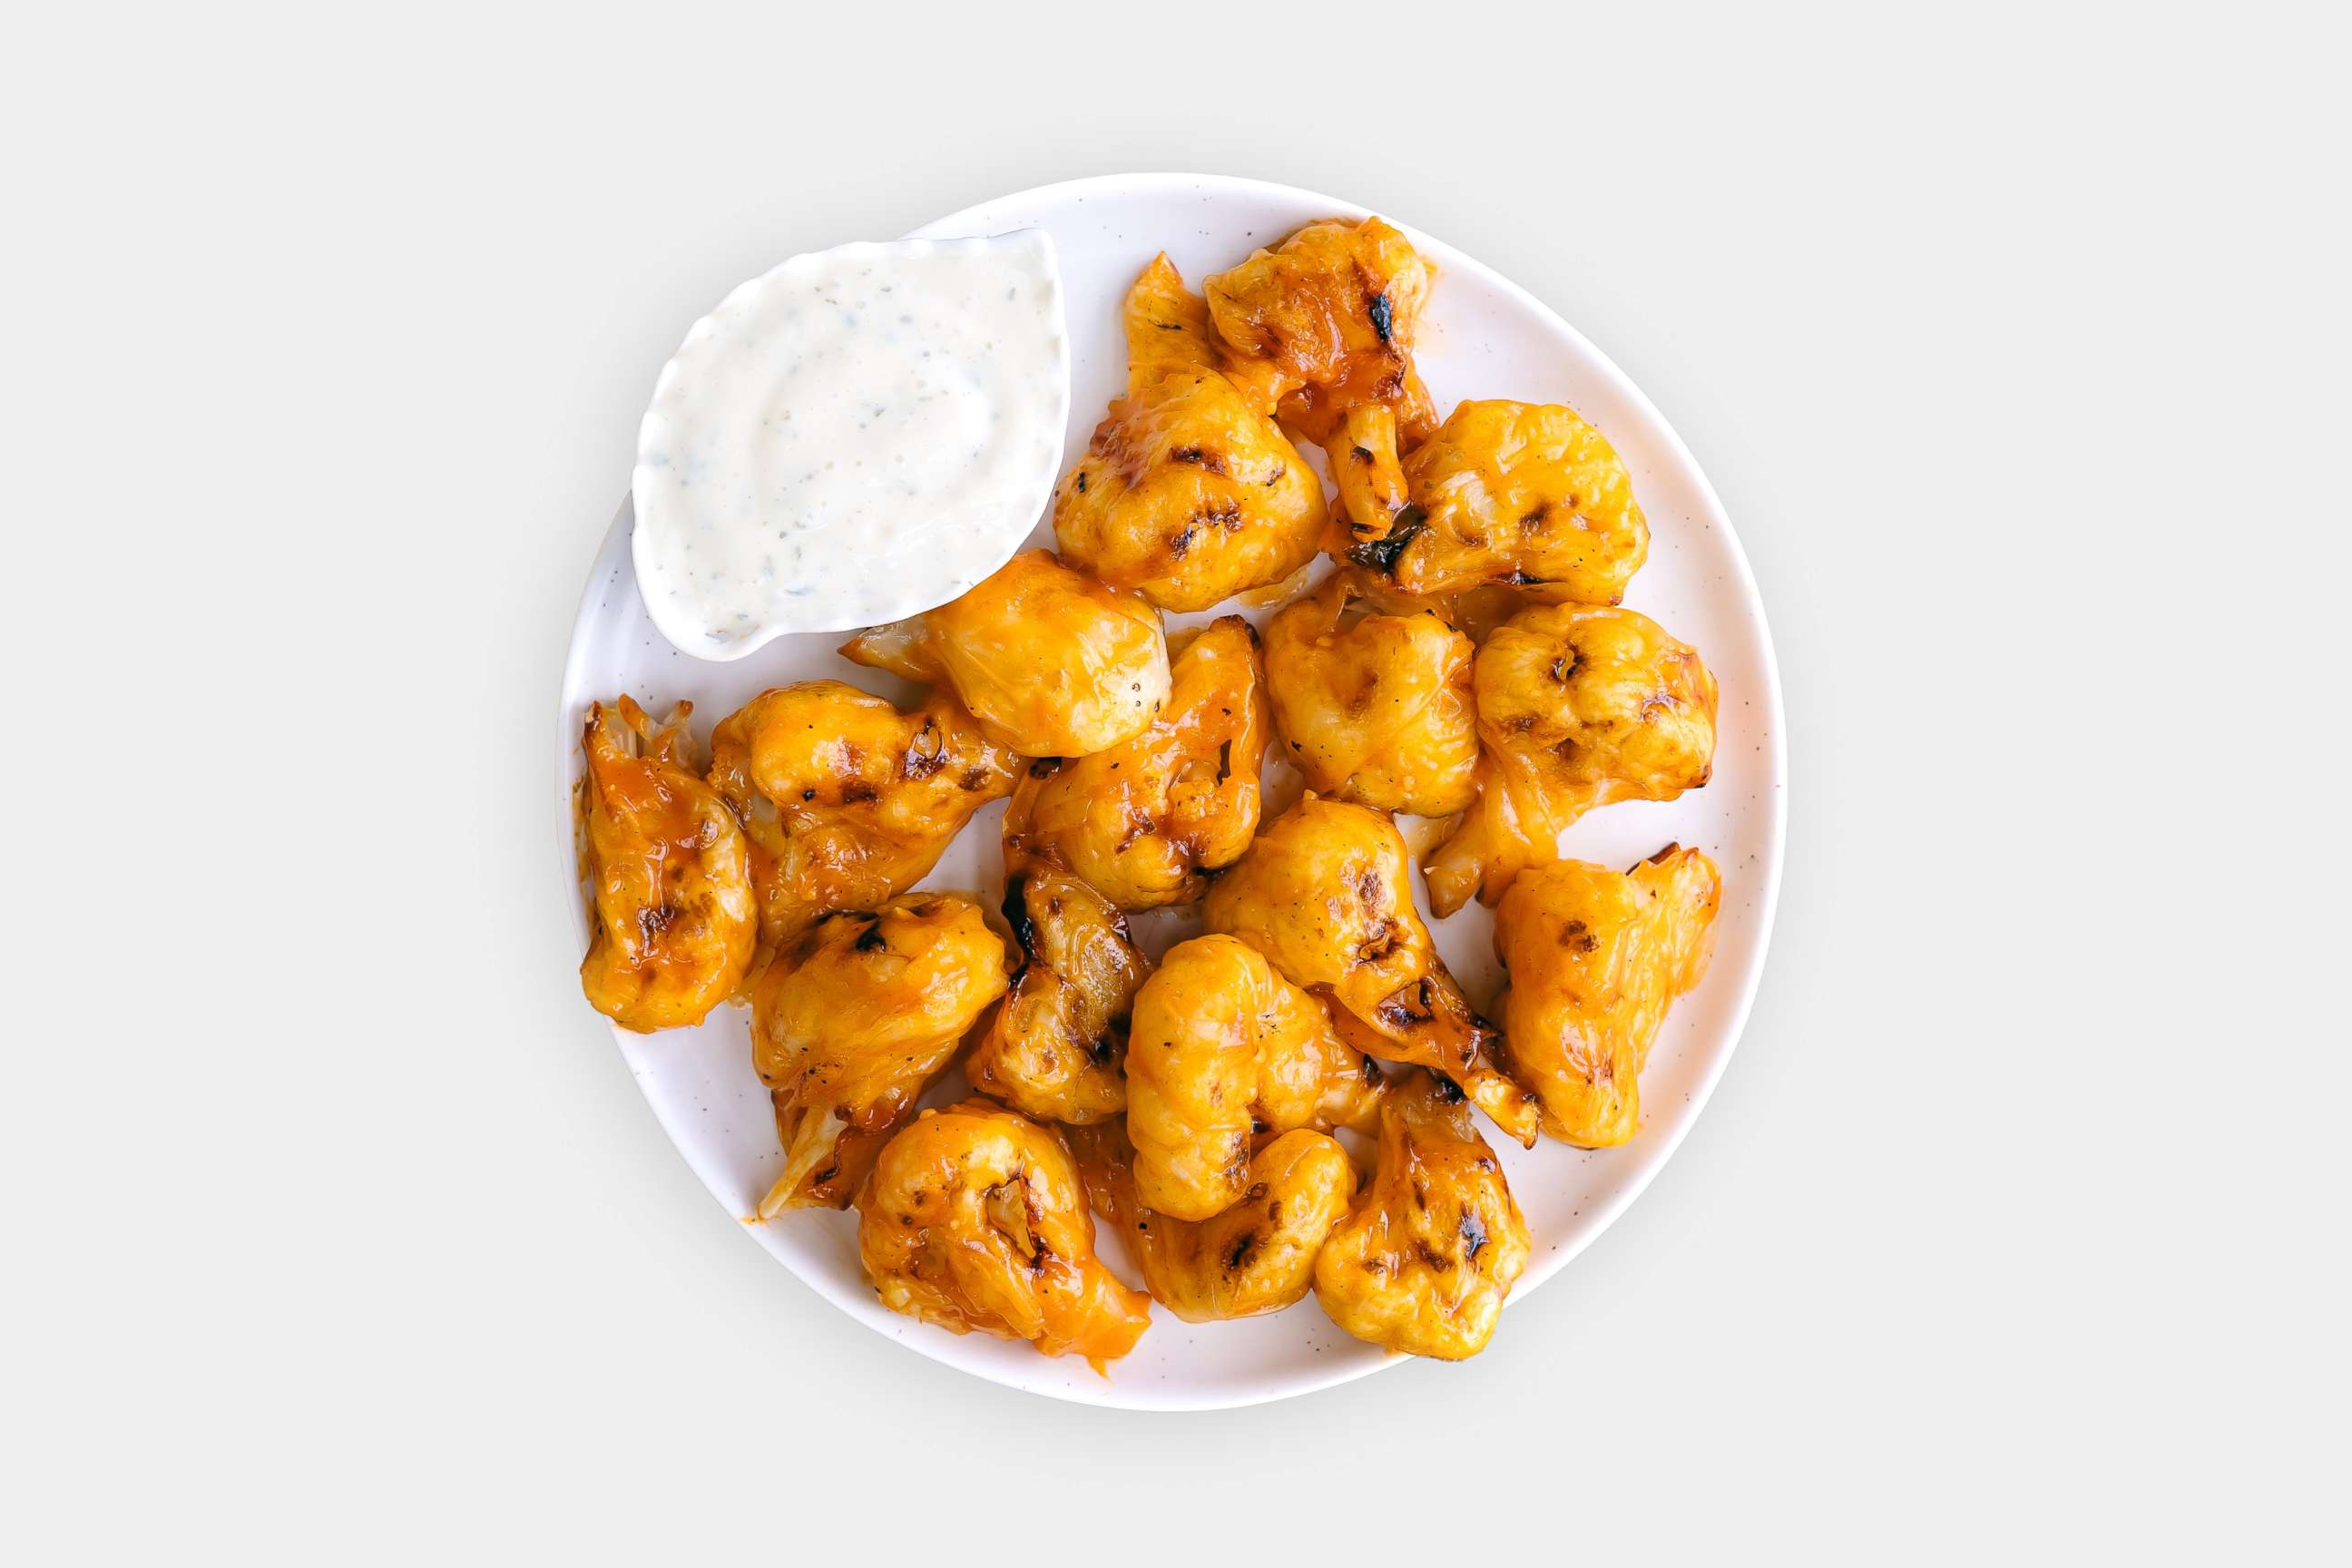 PHOTO: A plant-based alternative to buffalo wings made with cauliflower.